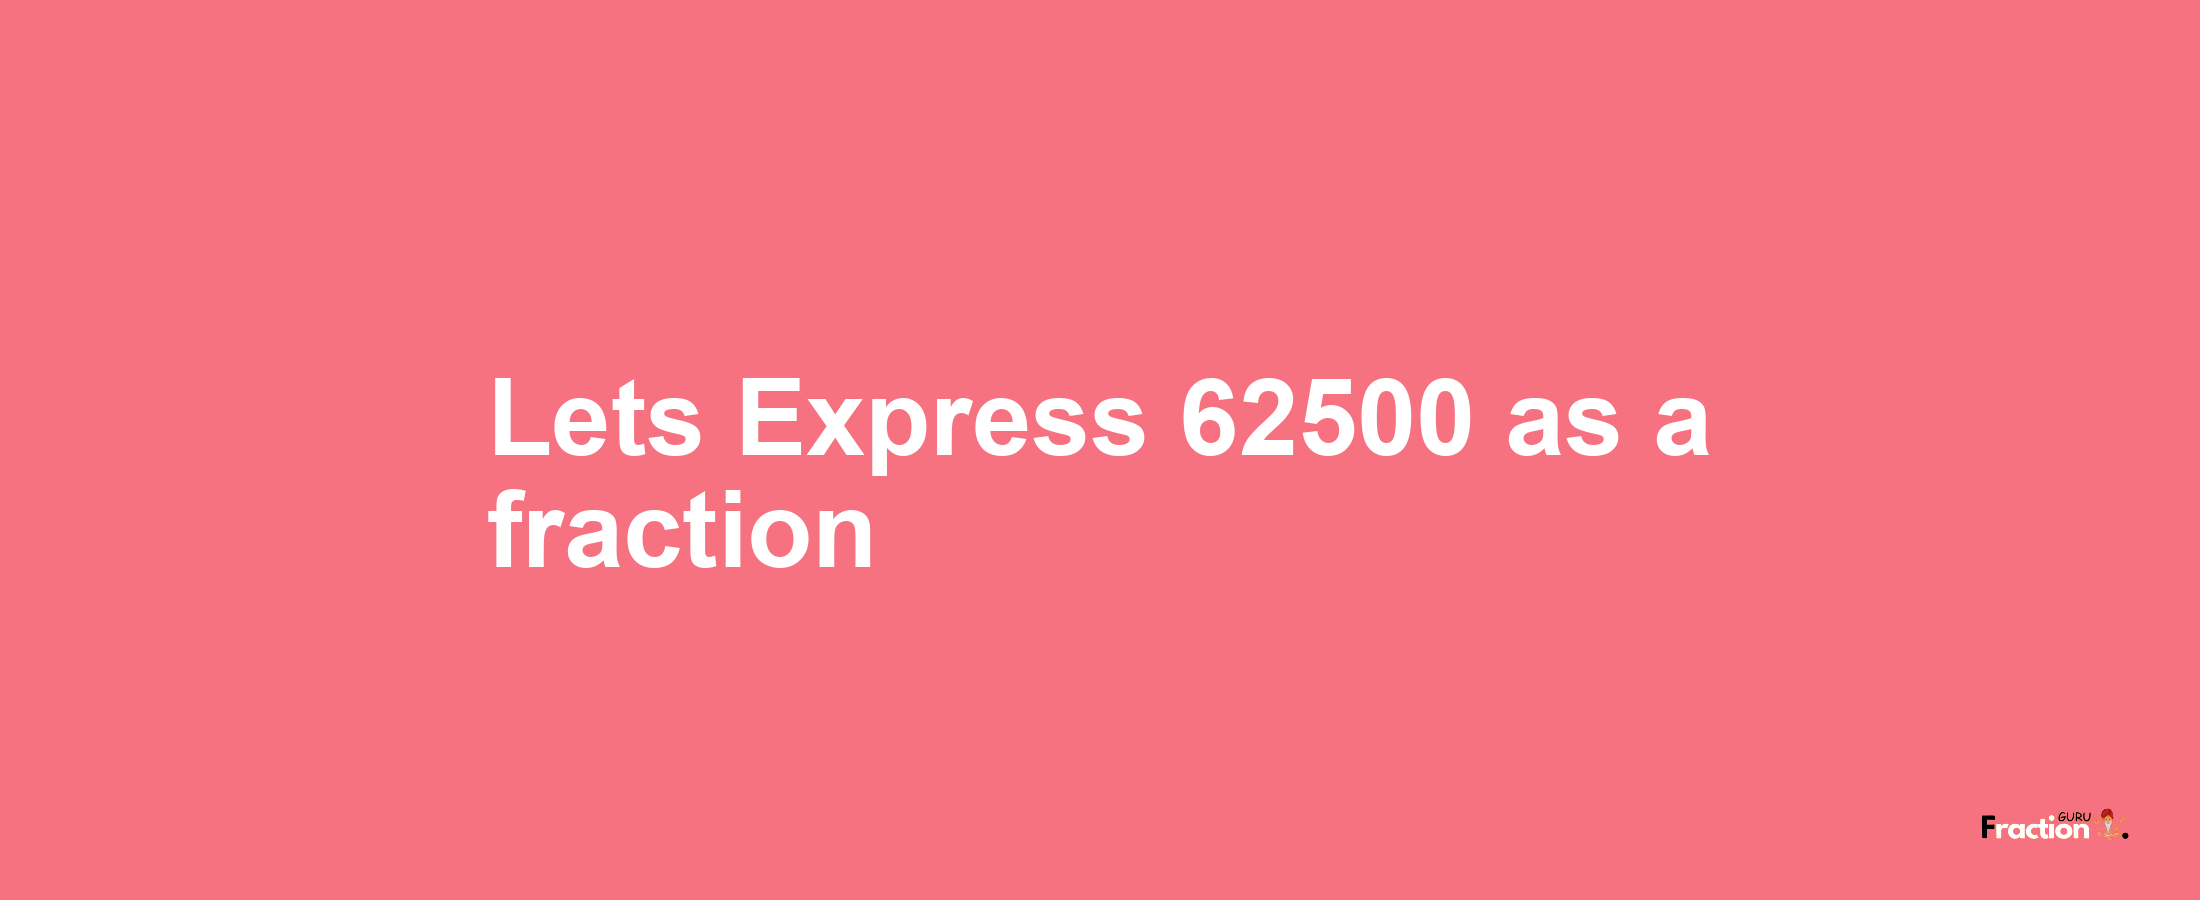 Lets Express 62500 as afraction